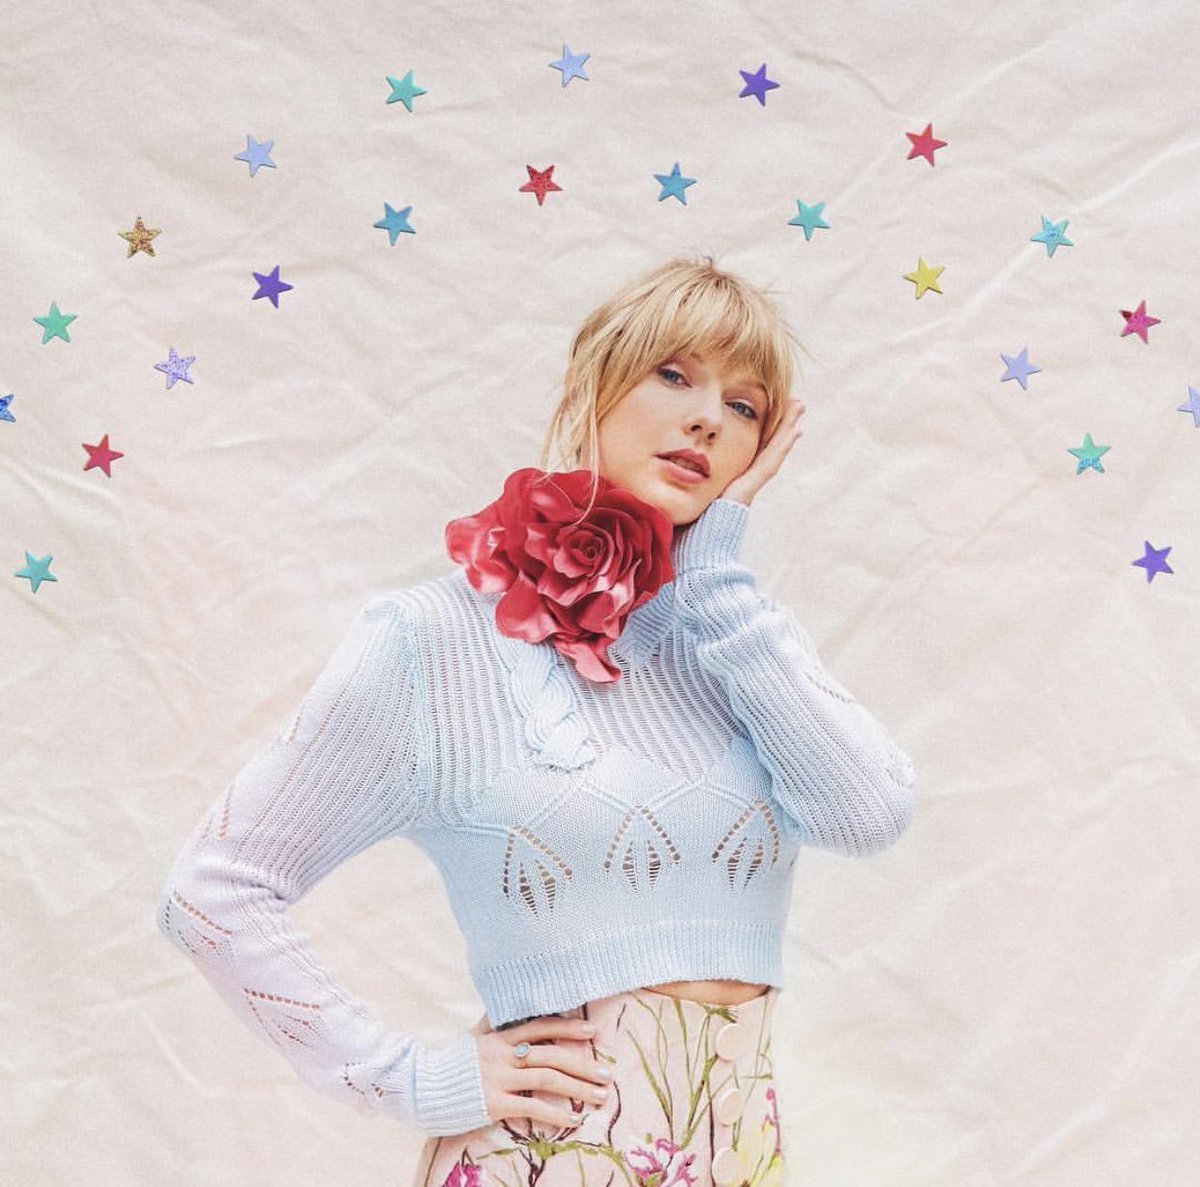 2019 Billboard Music Awards: Taylor Swift To Perform 'ME!' - That Grape Juice